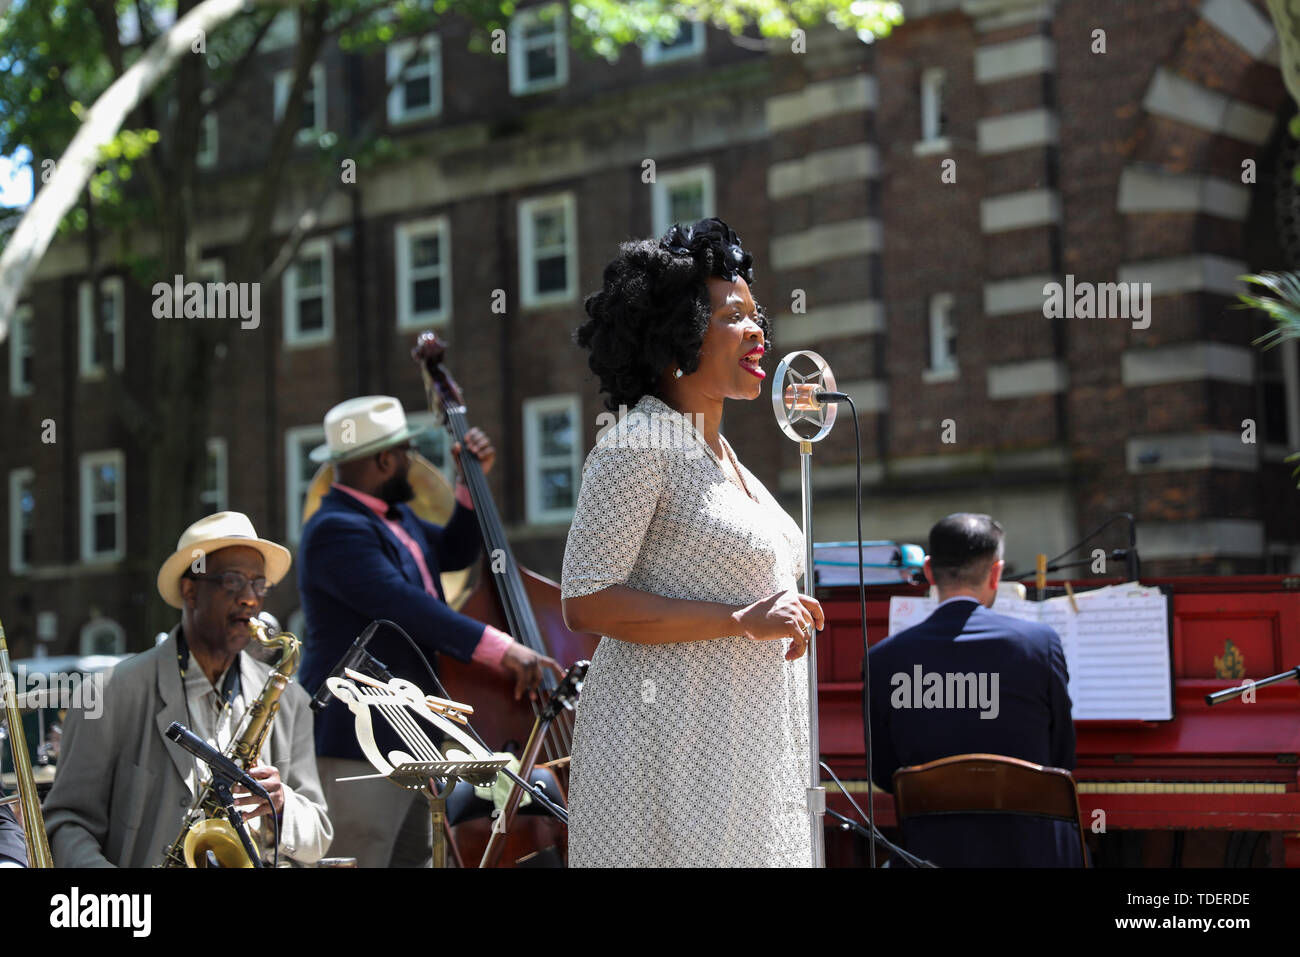 New York, USA. 15th June, 2019. A band performs during the 14th annual Jazz Age Lawn Party on Governors Island of New York, the United States, on June 15, 2019. The event which kicked off on Saturday this year, started in 2005 as a small gathering on Governors Island and has since grown into one of New York's most popular events. Thousands of visitors come to the event each year to discover the music and zeitgeist of the 1920s. Credit: Wang Ying/Xinhua/Alamy Live News Stock Photo